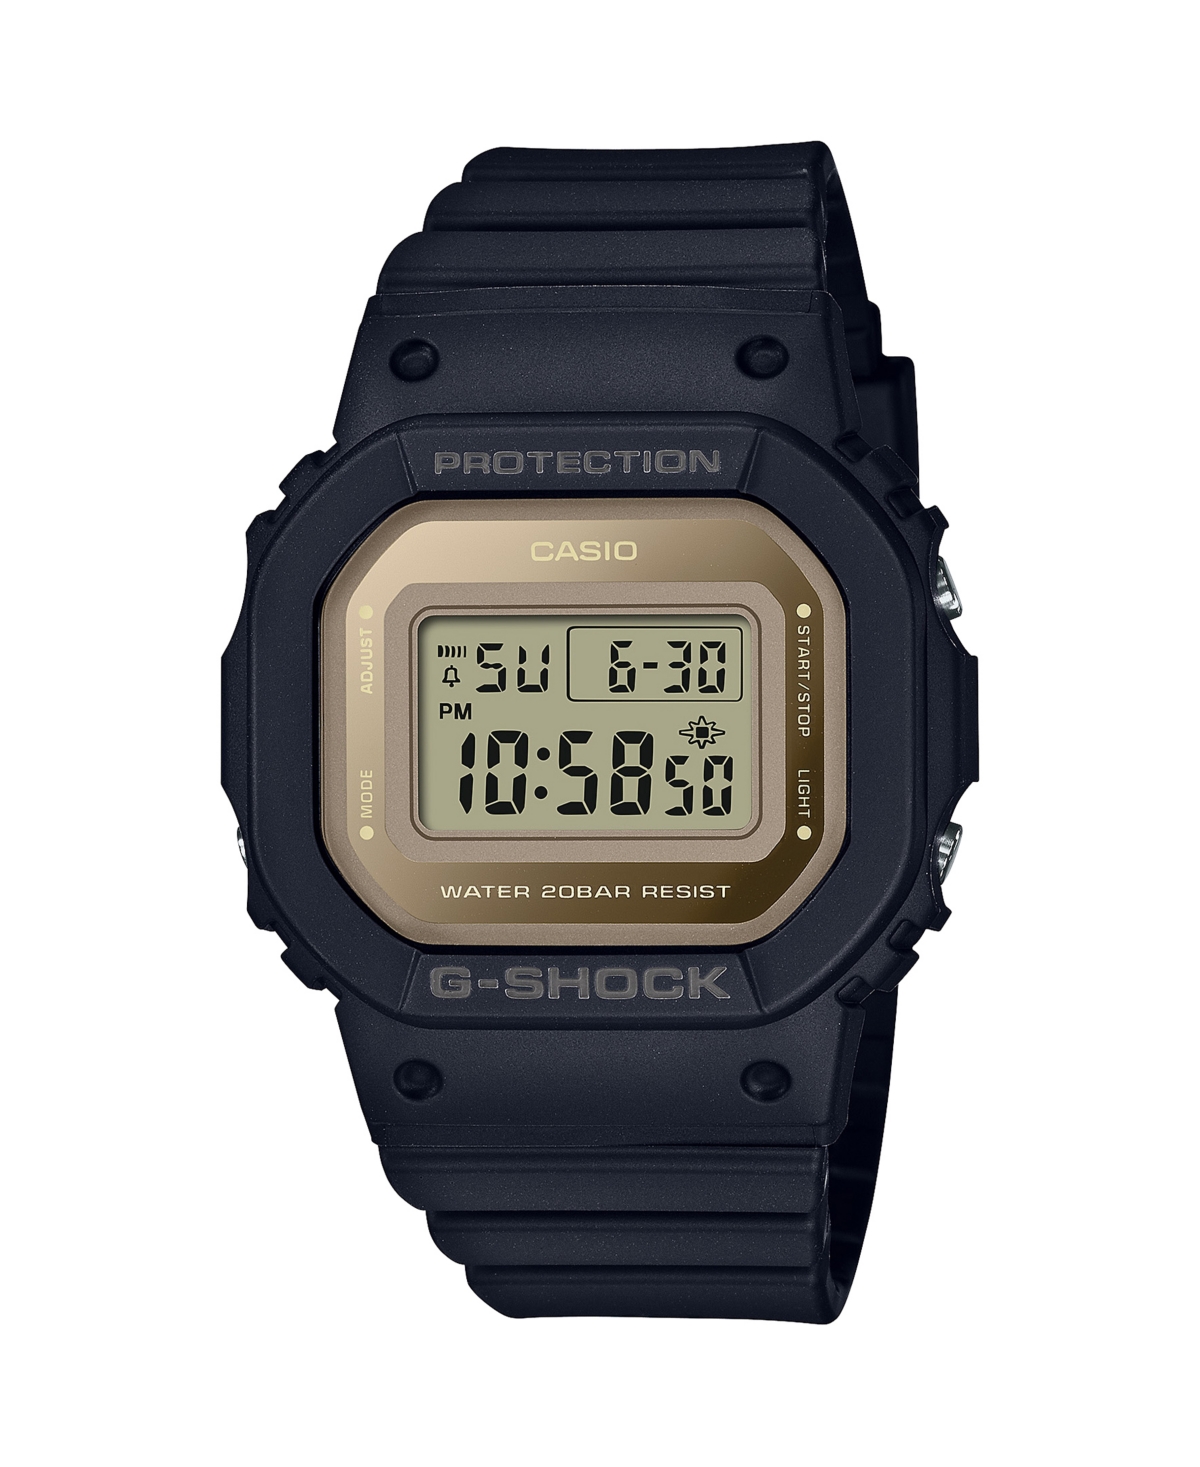 Unisex Black and Gold-Tone Resin Digital Watch 40.5mm, GMDS5600-1 - Black